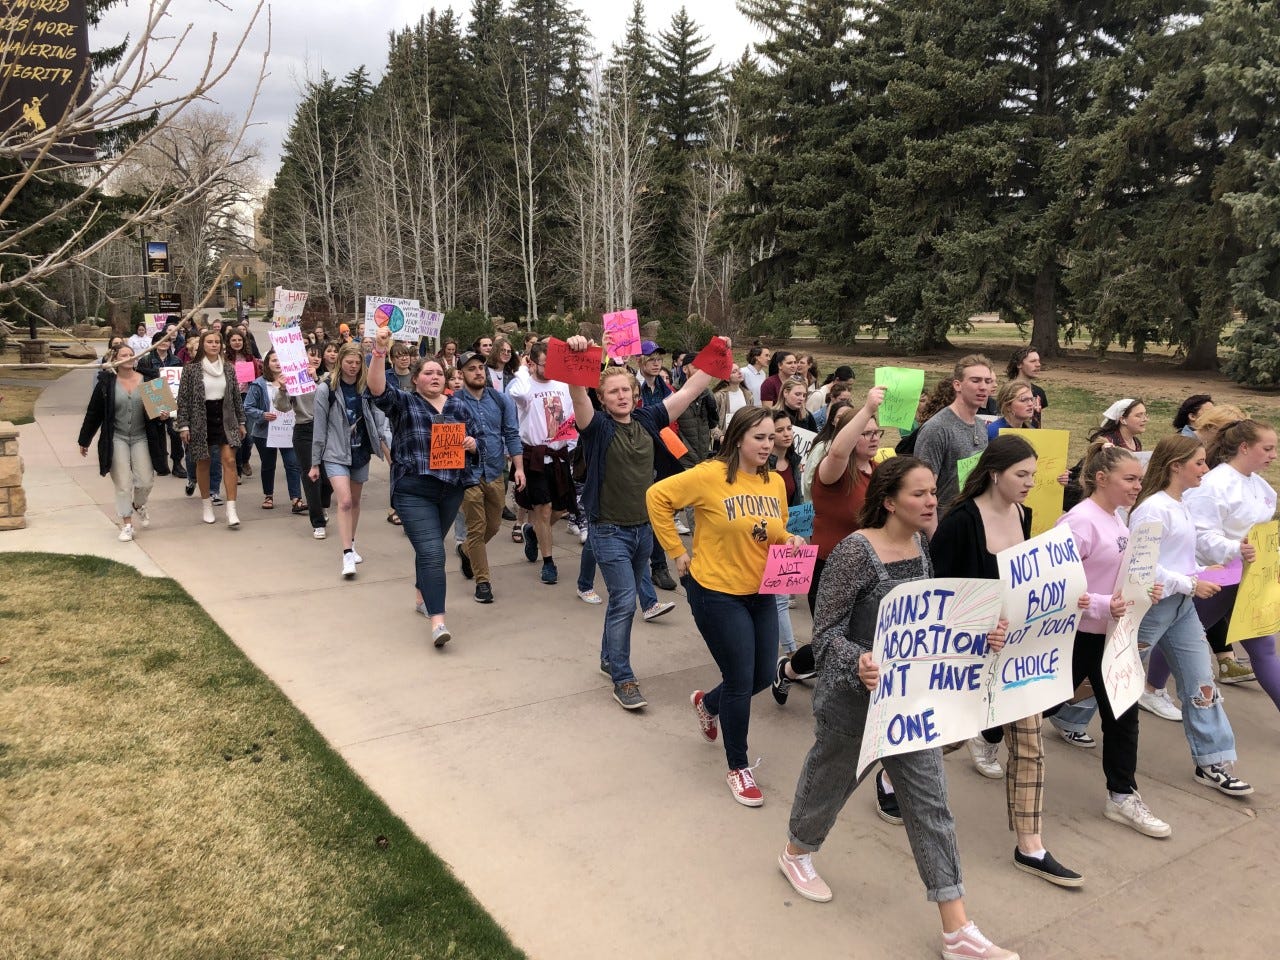 Dozens of young people carrying signs with pro-choice slogans march toward the camera on a wide sidewalk in front of tall evergreen trees.